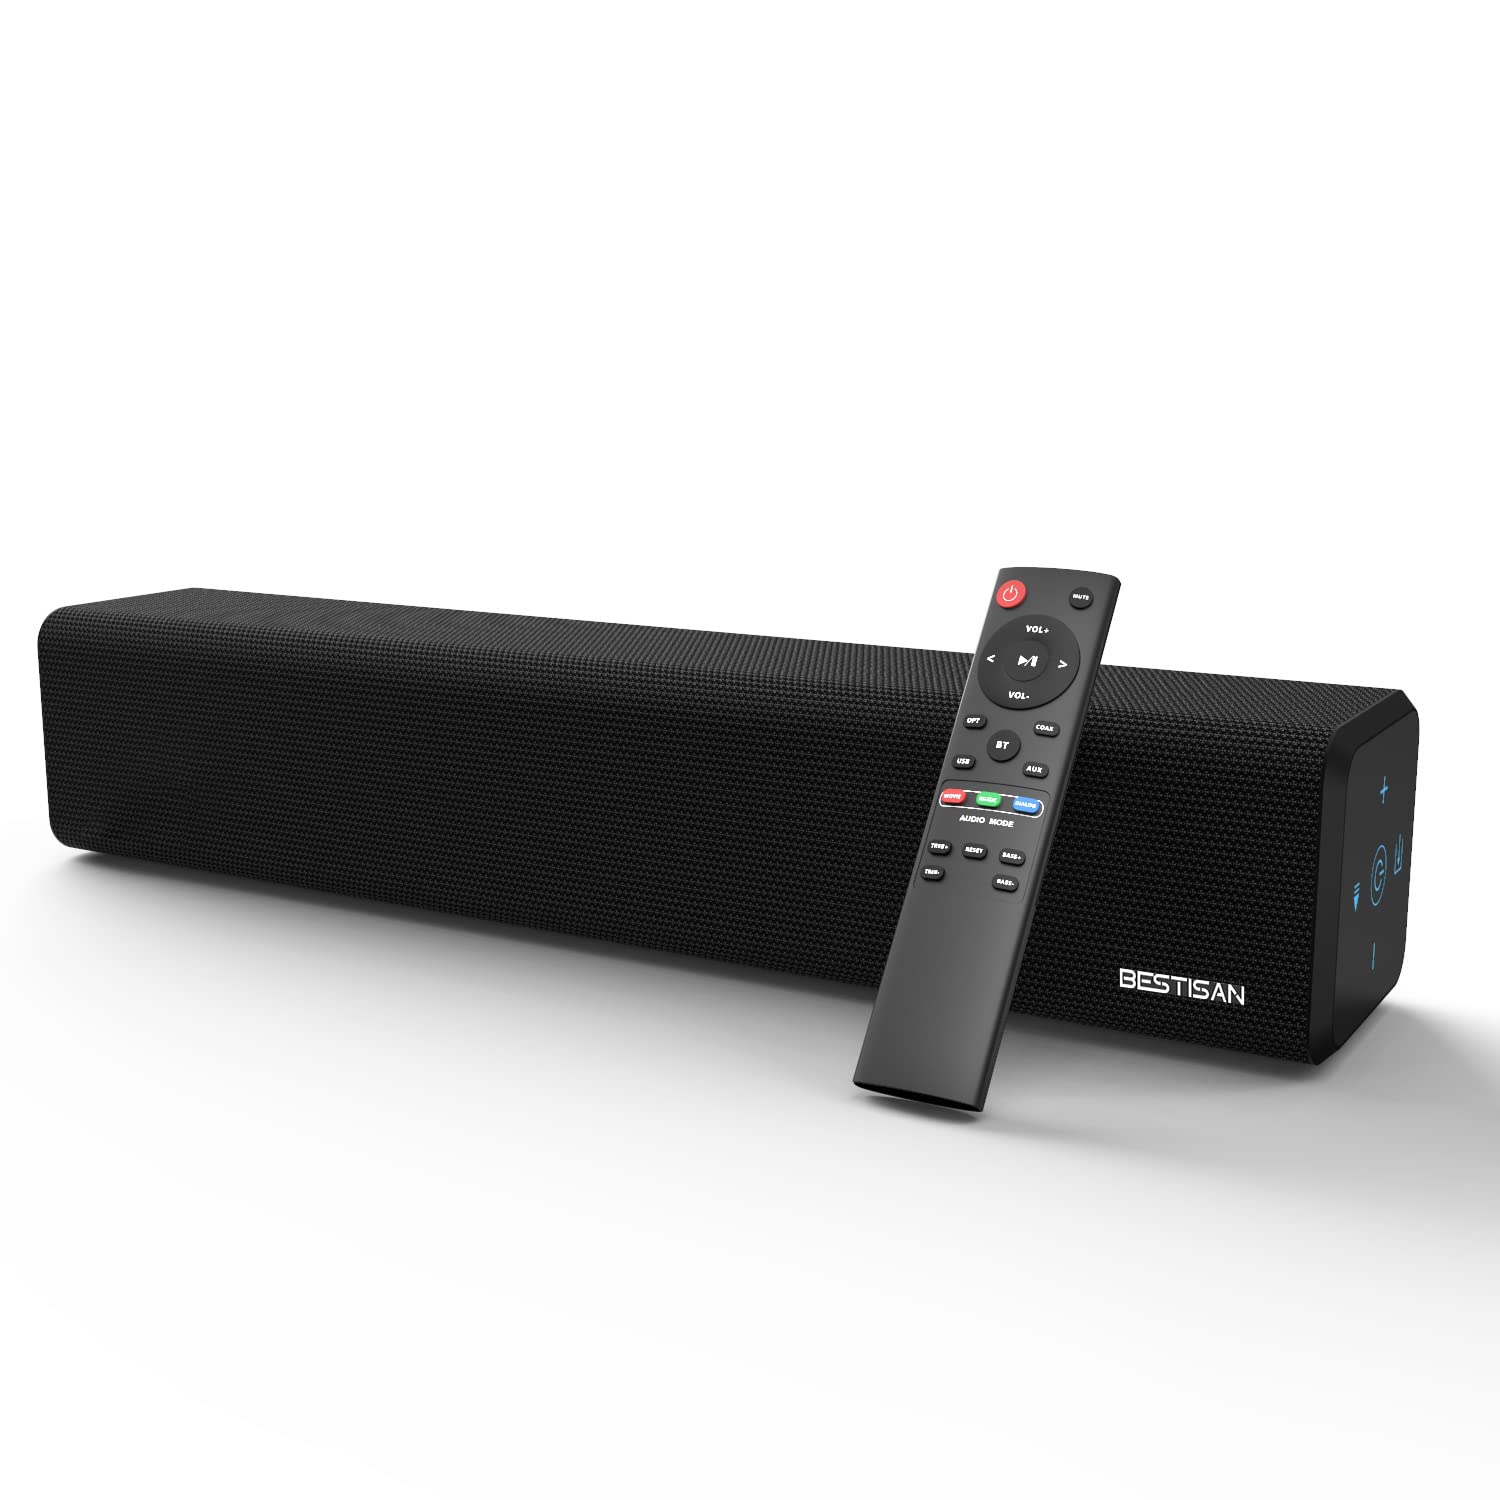 How To Connect Bestisan Soundbar To TV